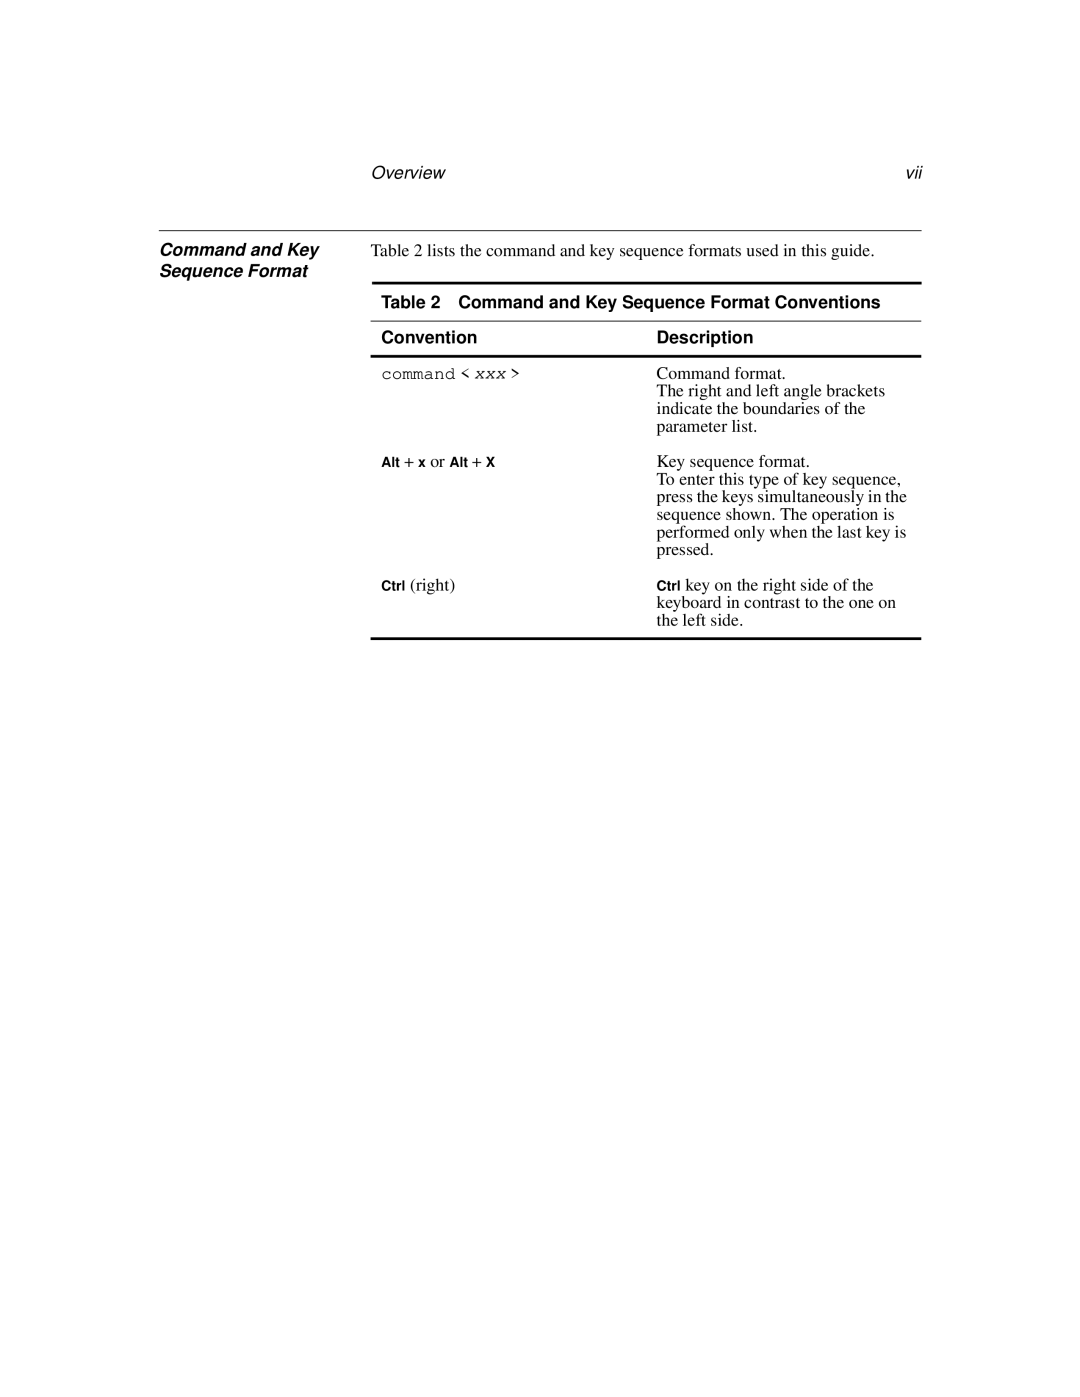 IBM TN5250 manual Sequence Format, Overview 